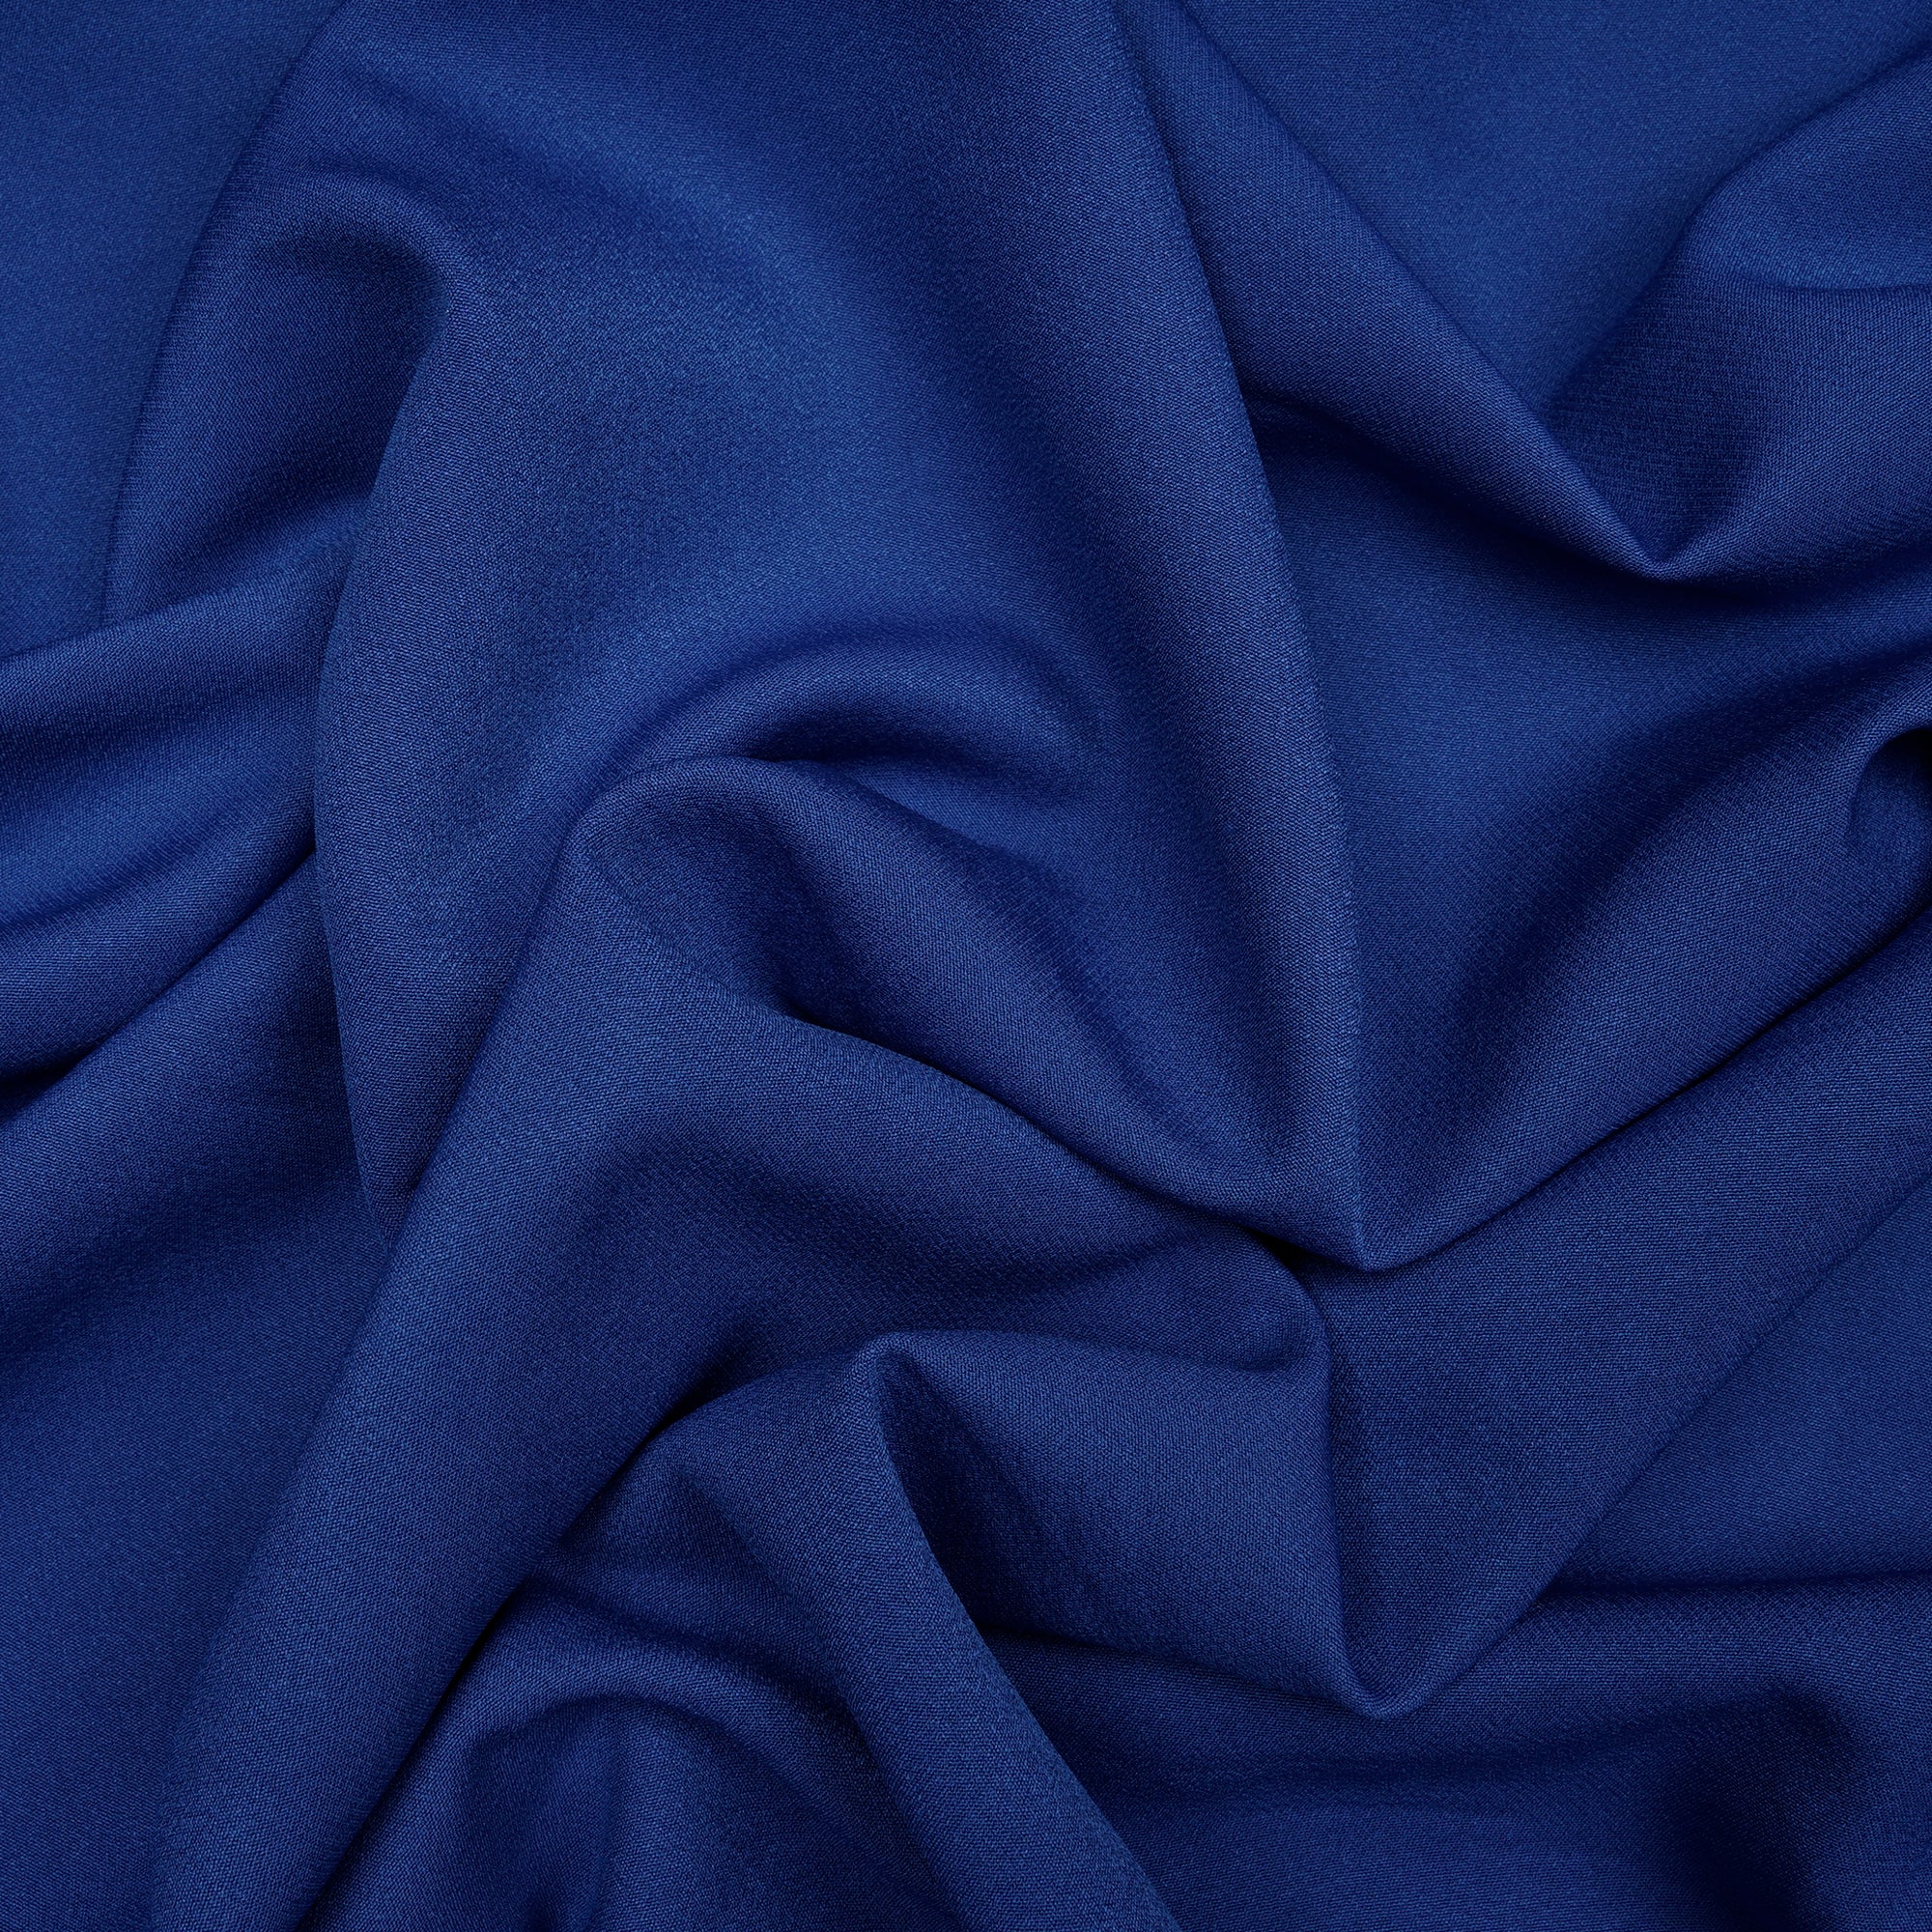 Lapis Blue Solid Dyed Imported Banana Crepe Fabric (60" Width)